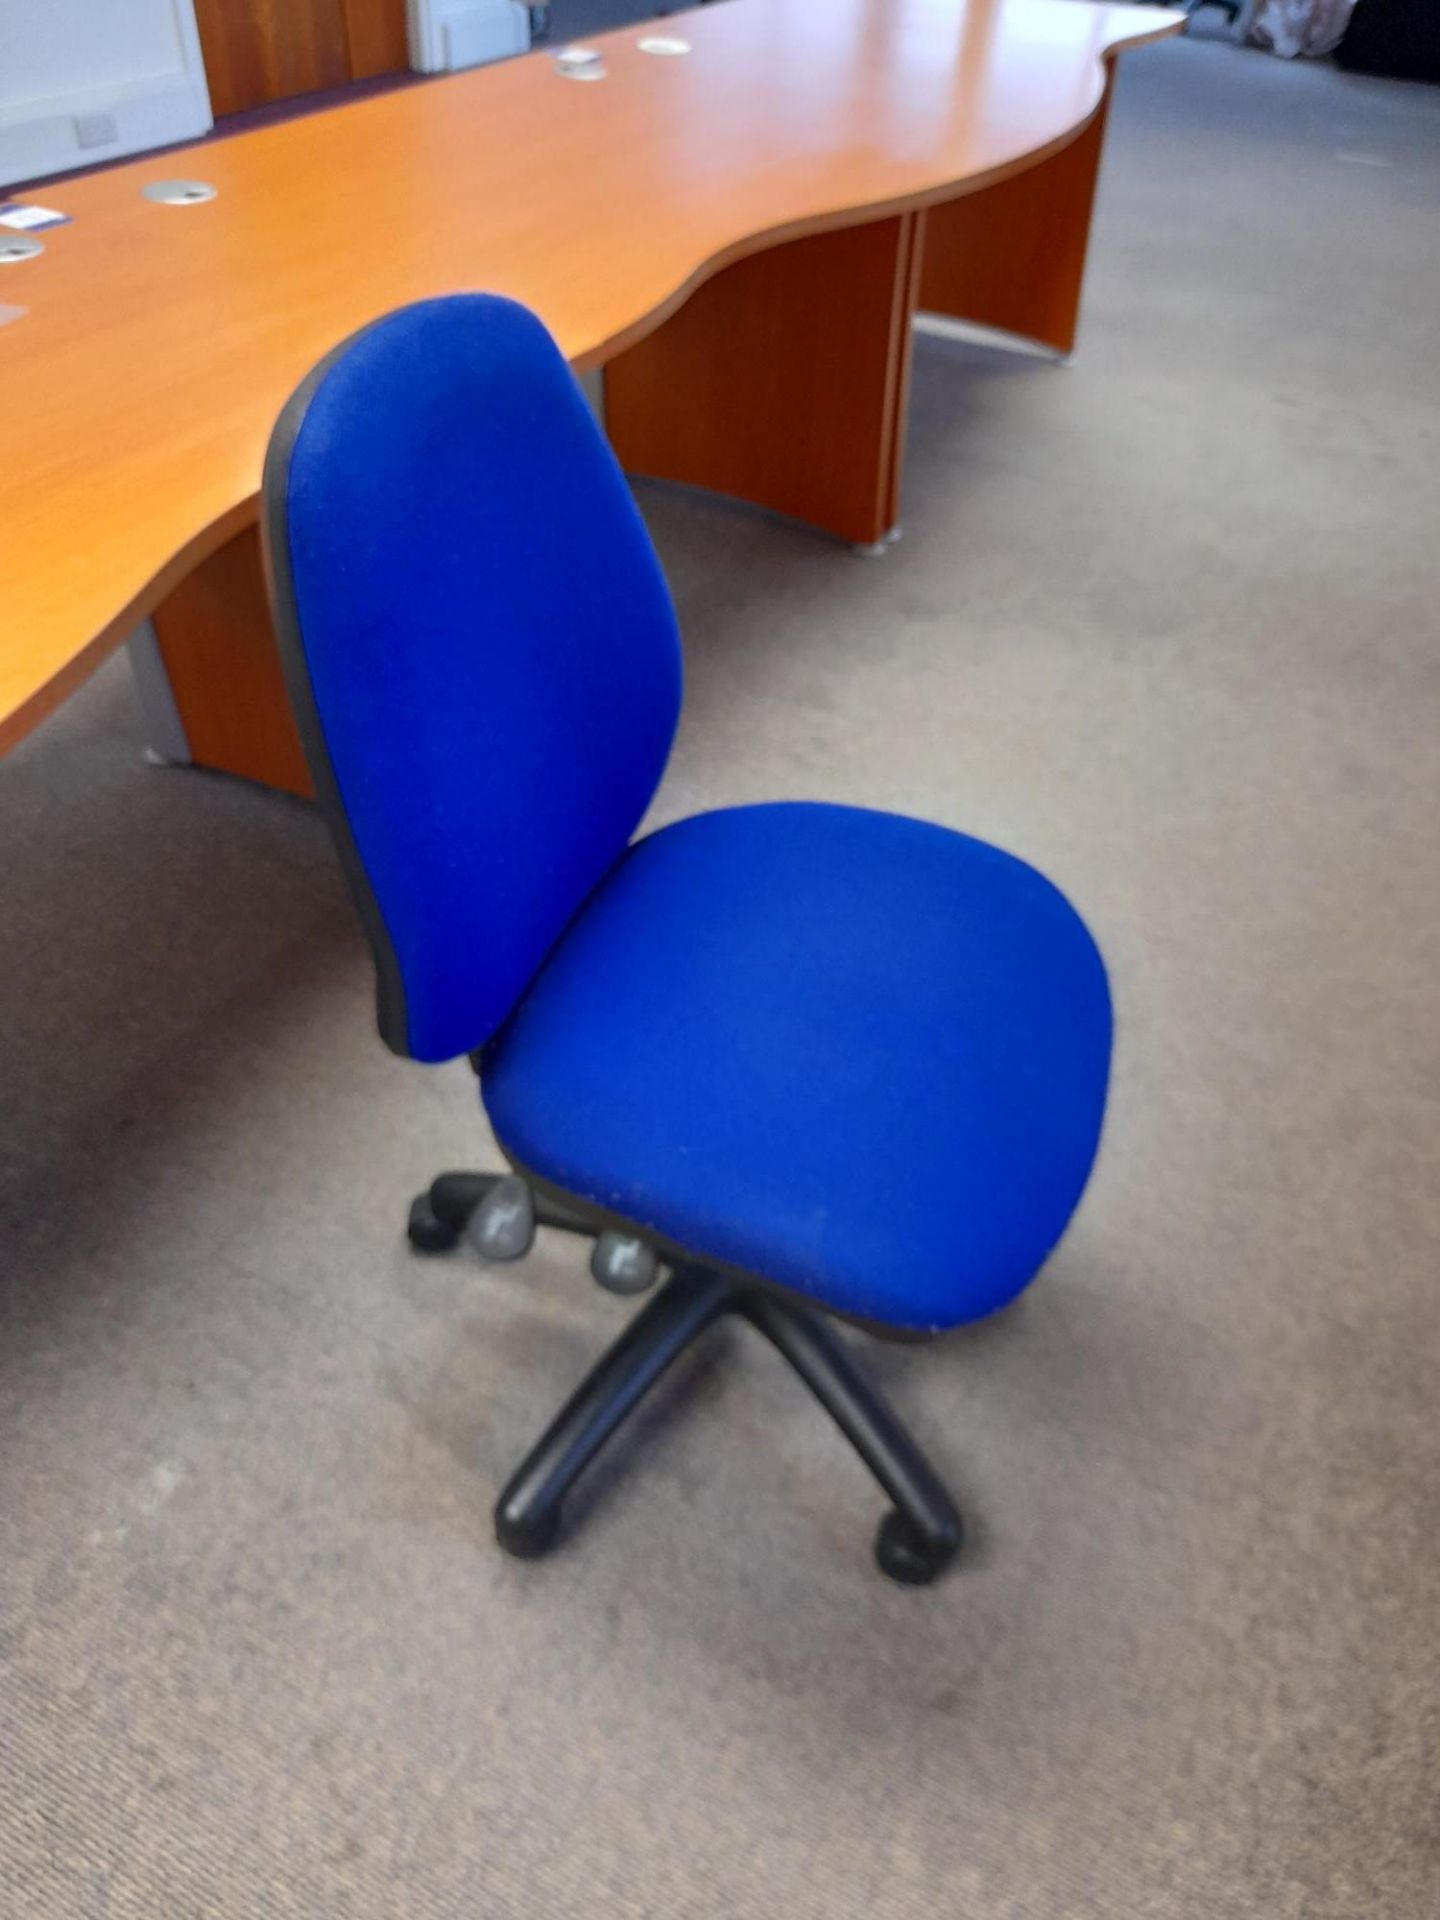 5 x various swivel chairs (photos for illustrative purposes only) (contents excluded) - Image 3 of 6